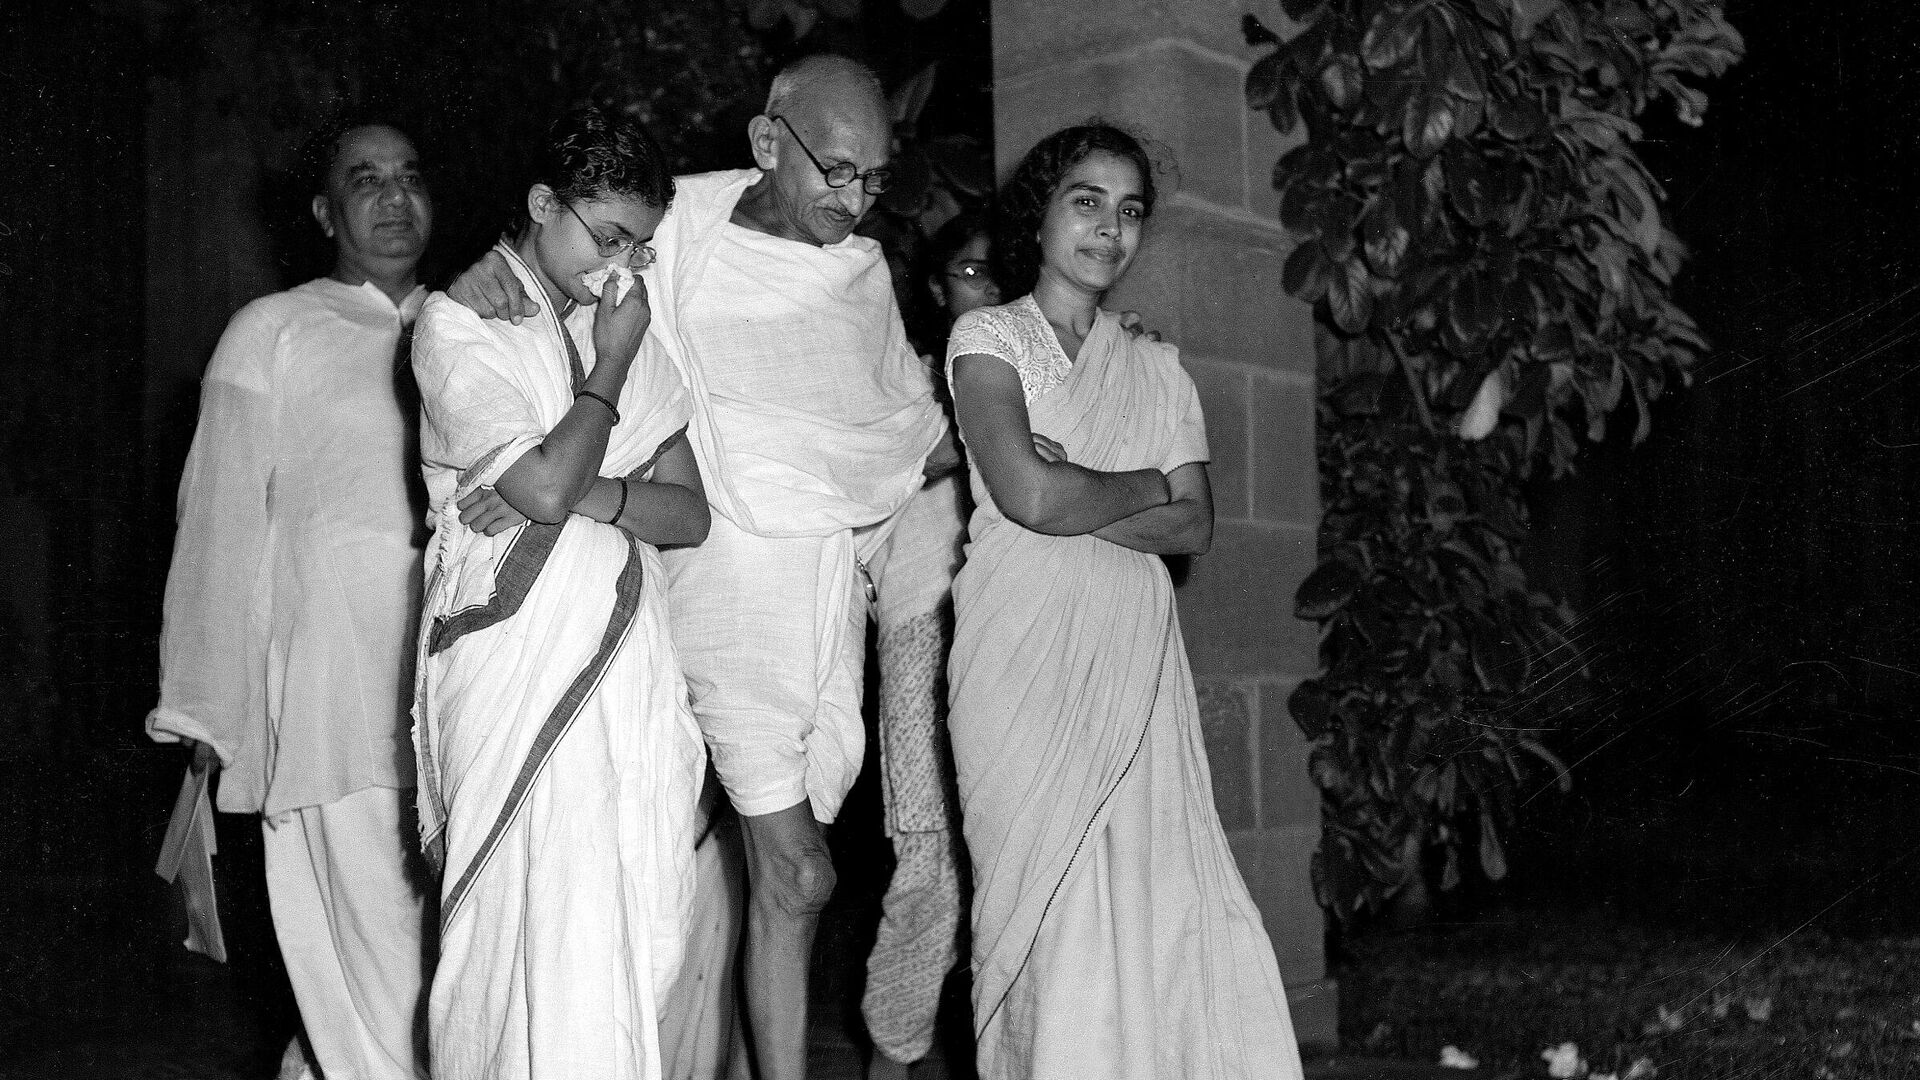 Mahatma Gandhi, center, accompanied by Abha Gandhi, left, and Dr. Sushila Nayyar, right, one of his attendants during his present illness, is shown walking in the garden of Birla House, New Delhi, India, October 2, 1947, as he celebrates his 78th birthday. H.S. Suhrawardy, former chief minister of Bengal Province, is at extreme left, rear - Sputnik International, 1920, 25.01.2022